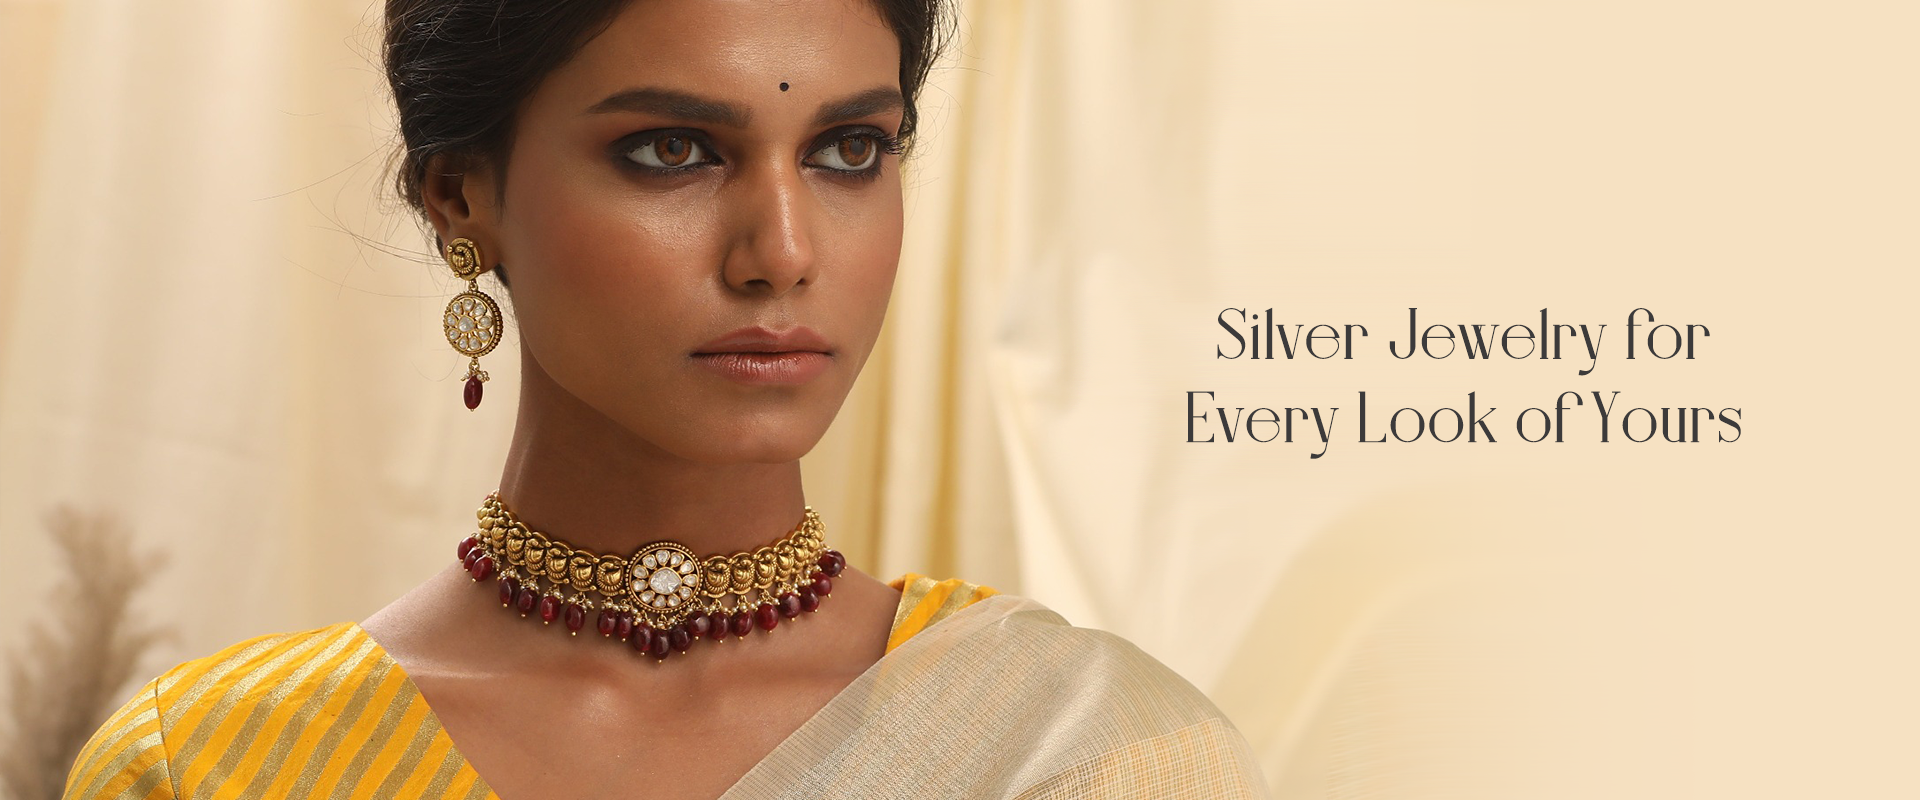 Silver Jewelry for Every Look of Yours